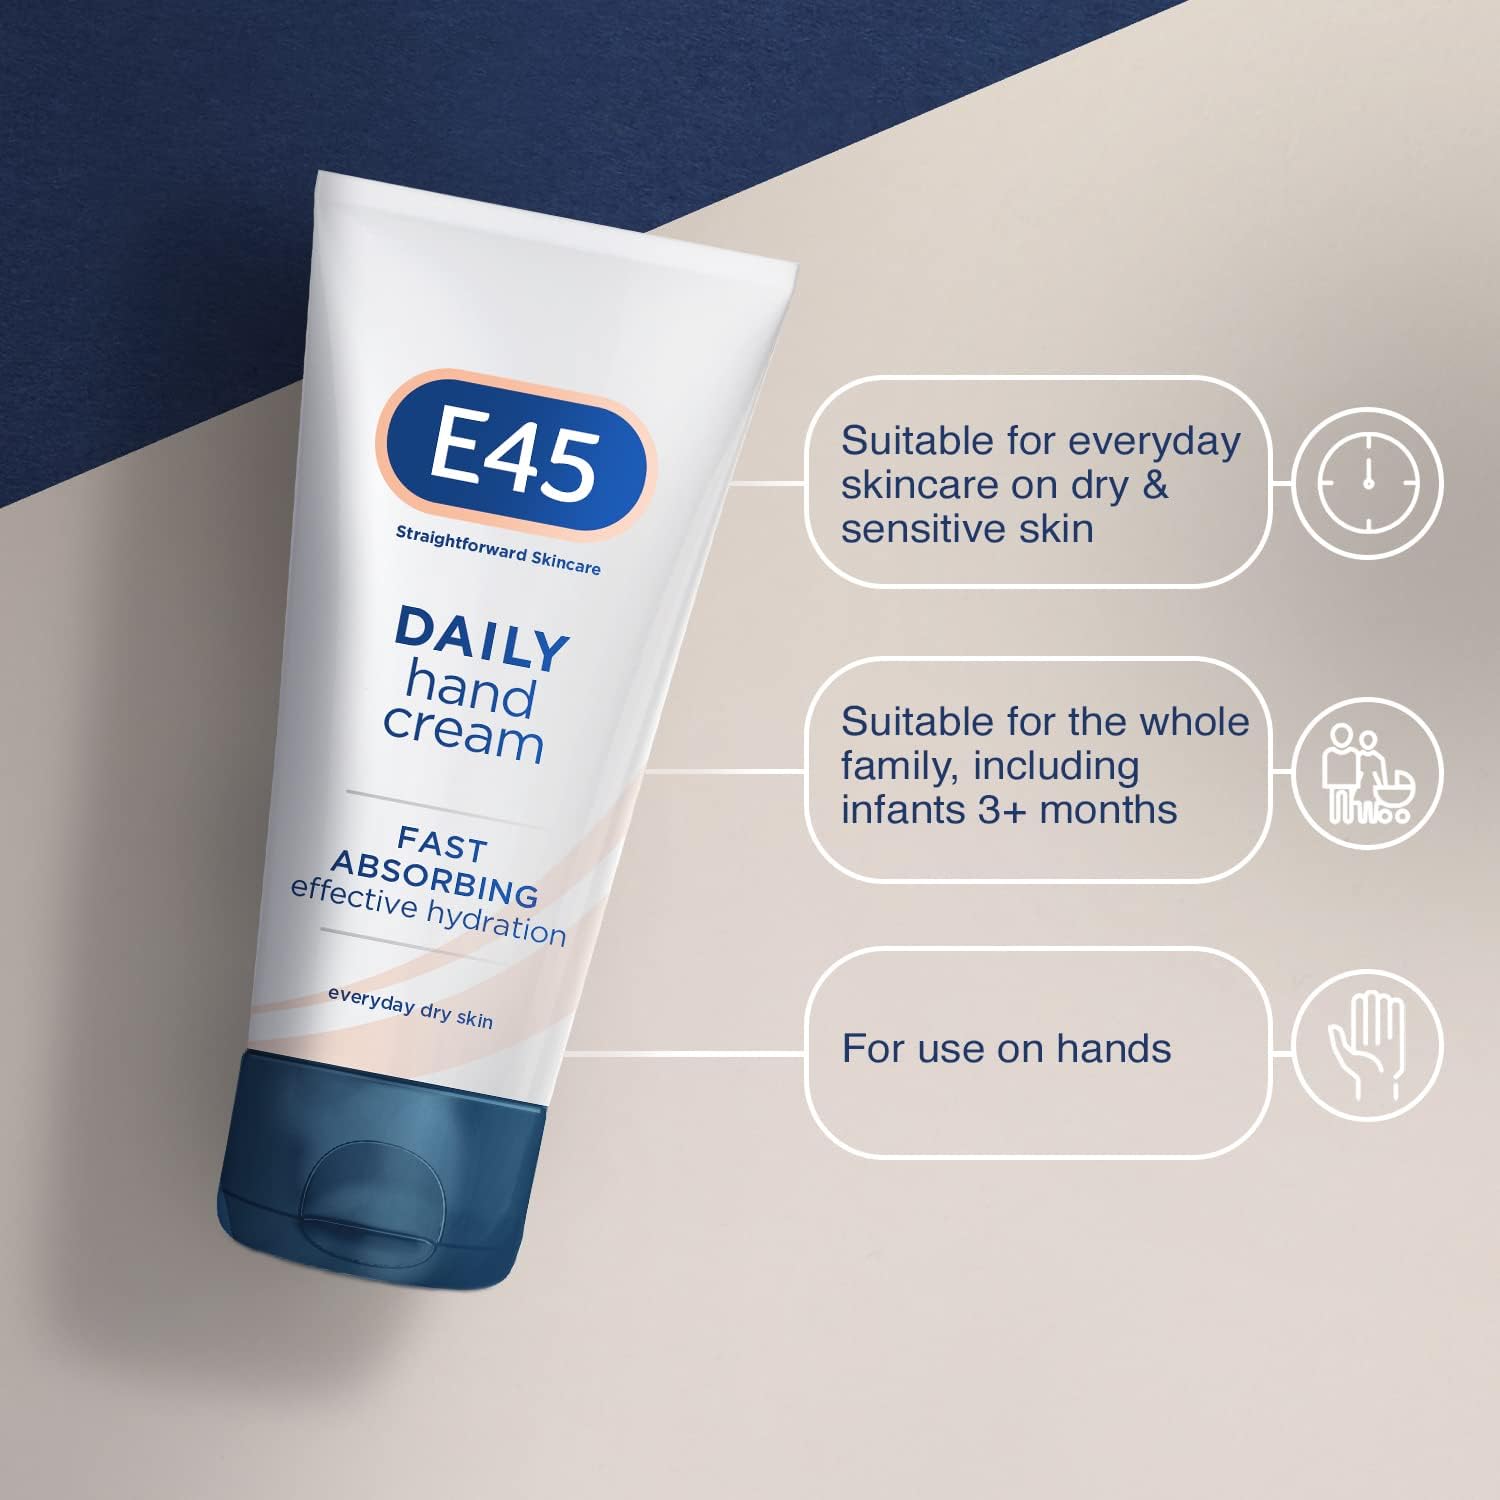 E45 Daily Hand Cream 50 ml – E45 Hand Cream for Very Dry Hands - Hand Moisturiser for Dry Skin and Sensitive Skin - Non-Greasy Hand Repair Cream for Soft and Supple Hands - Fast Absorption Formula : Amazon.co.uk: Beauty